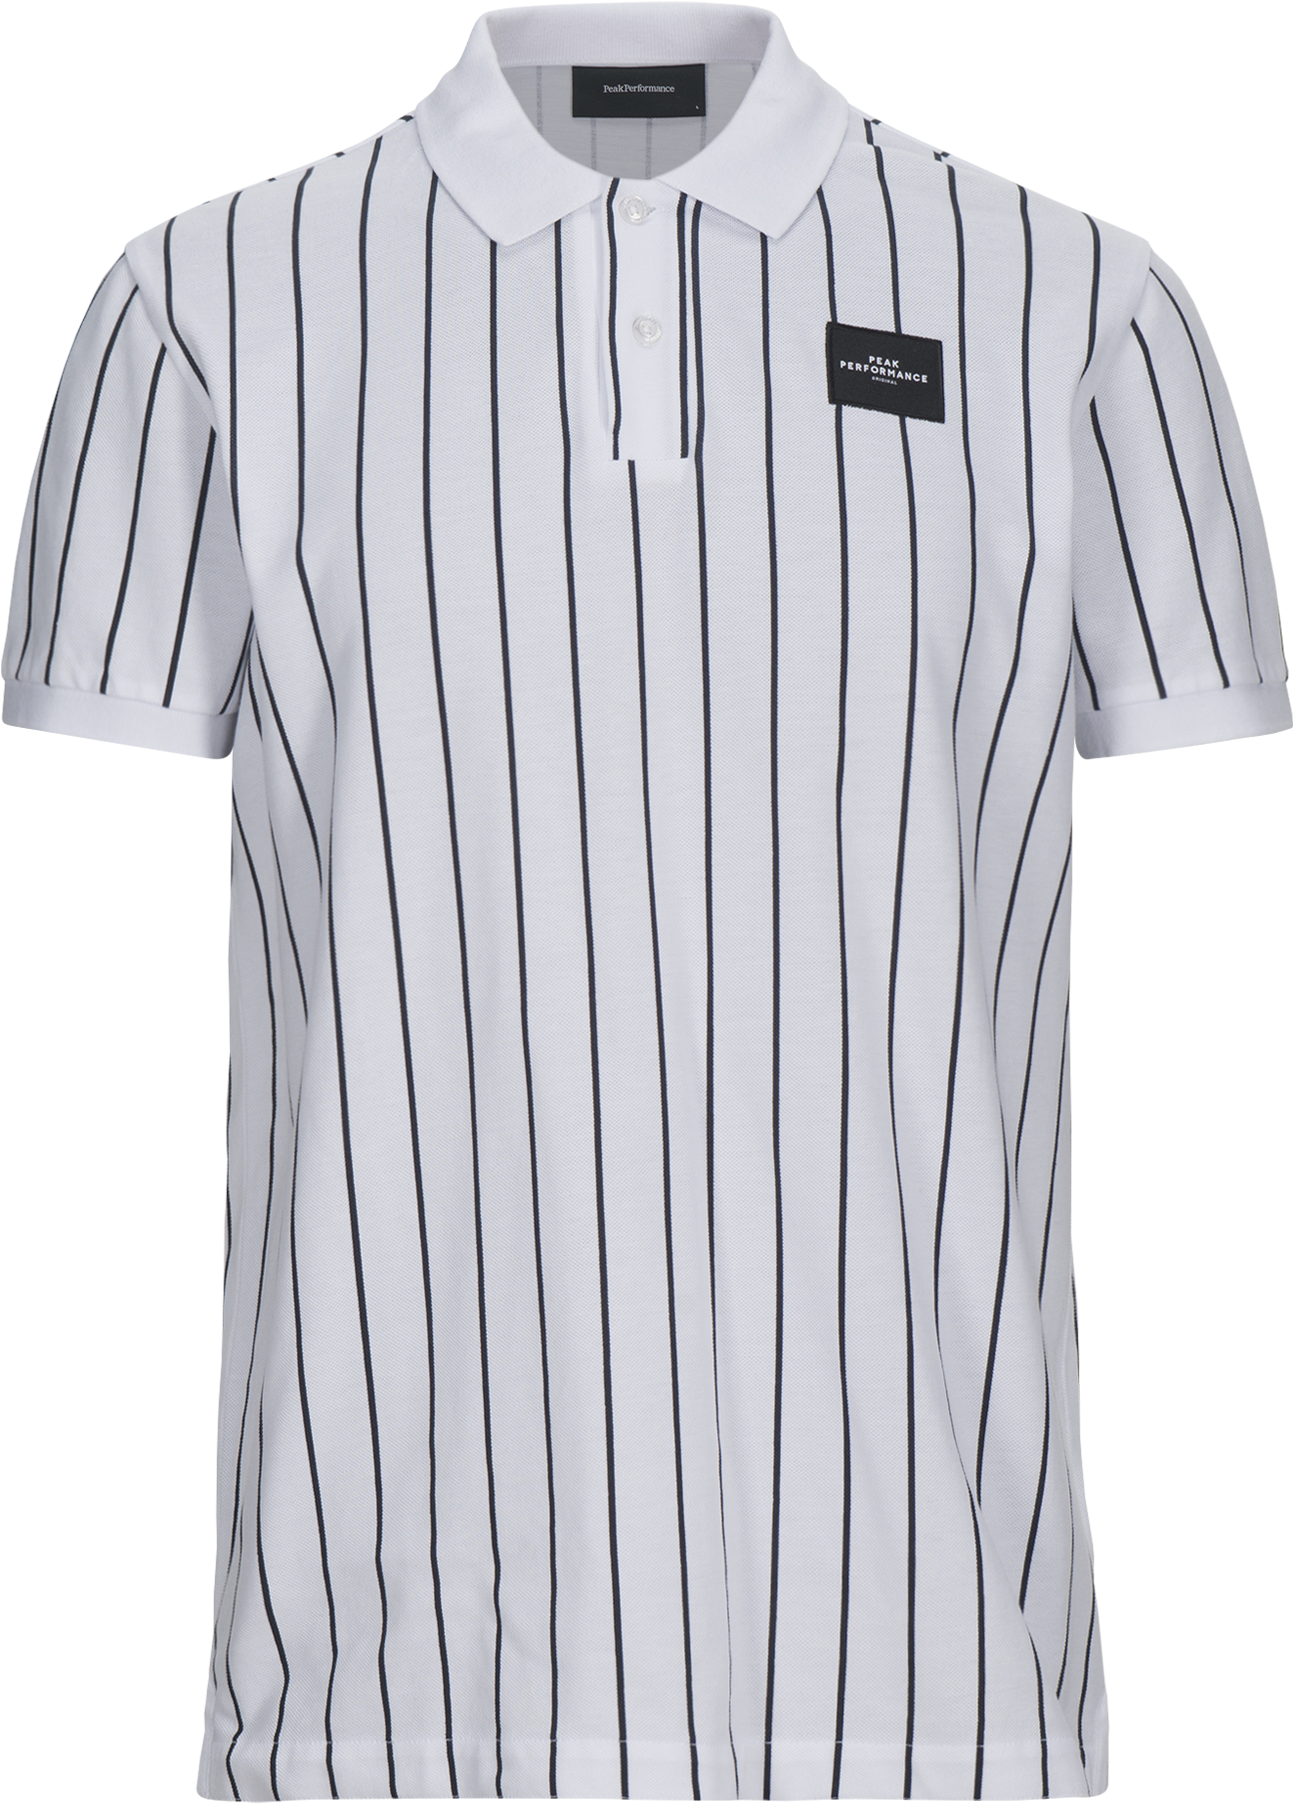 Striped Polo Shirt Product Display PNG image